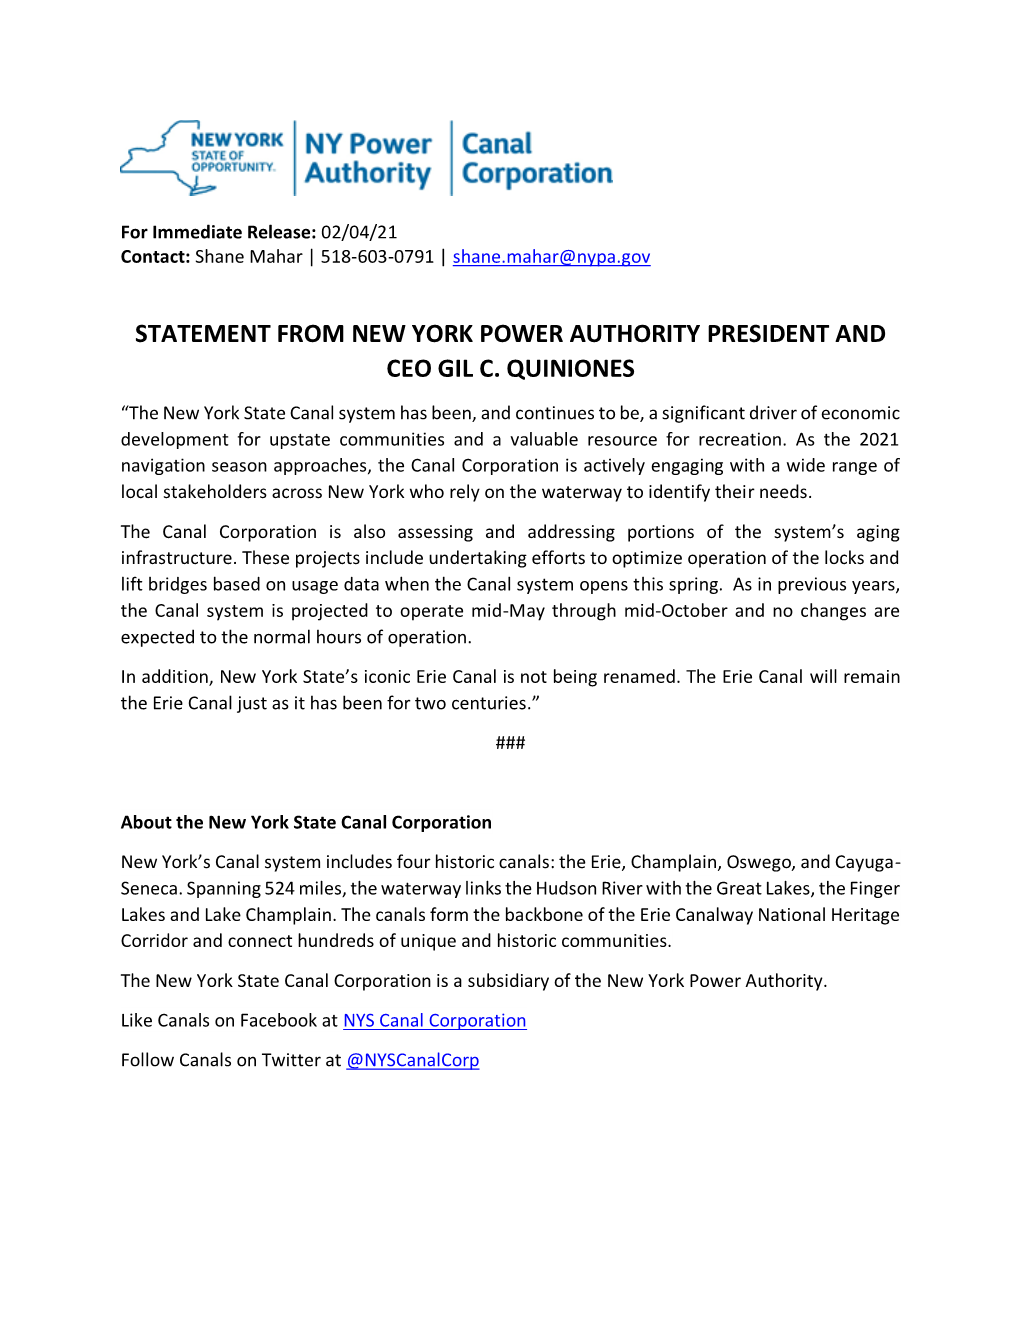 Statement from New York Power Authority President and Ceo Gil C